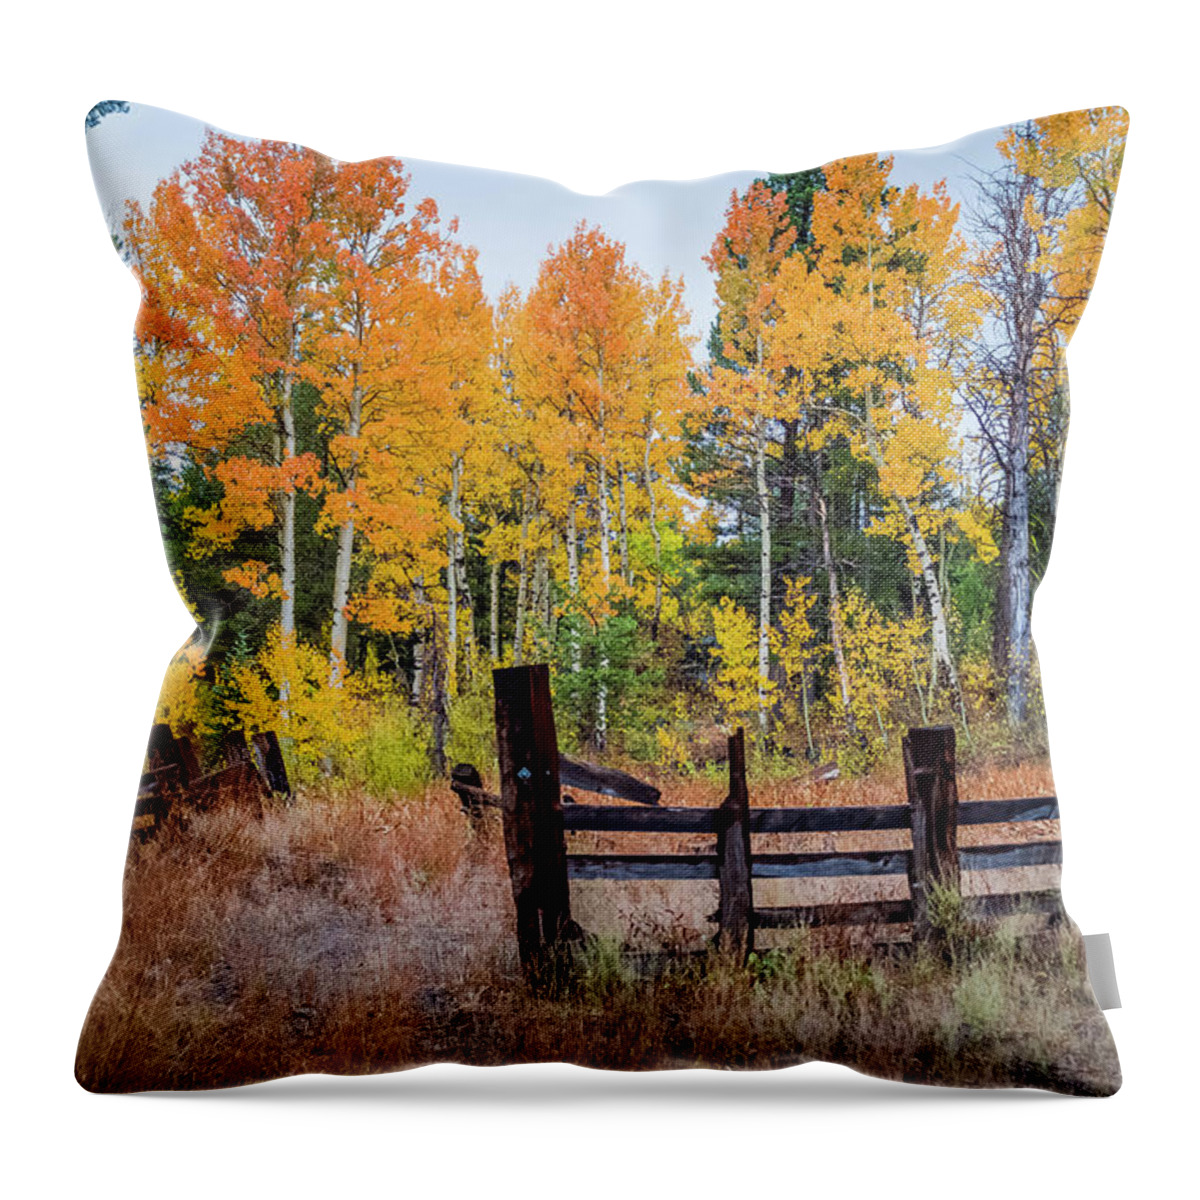 Fall Colors Throw Pillow featuring the photograph Fall Colors by Mike Ronnebeck